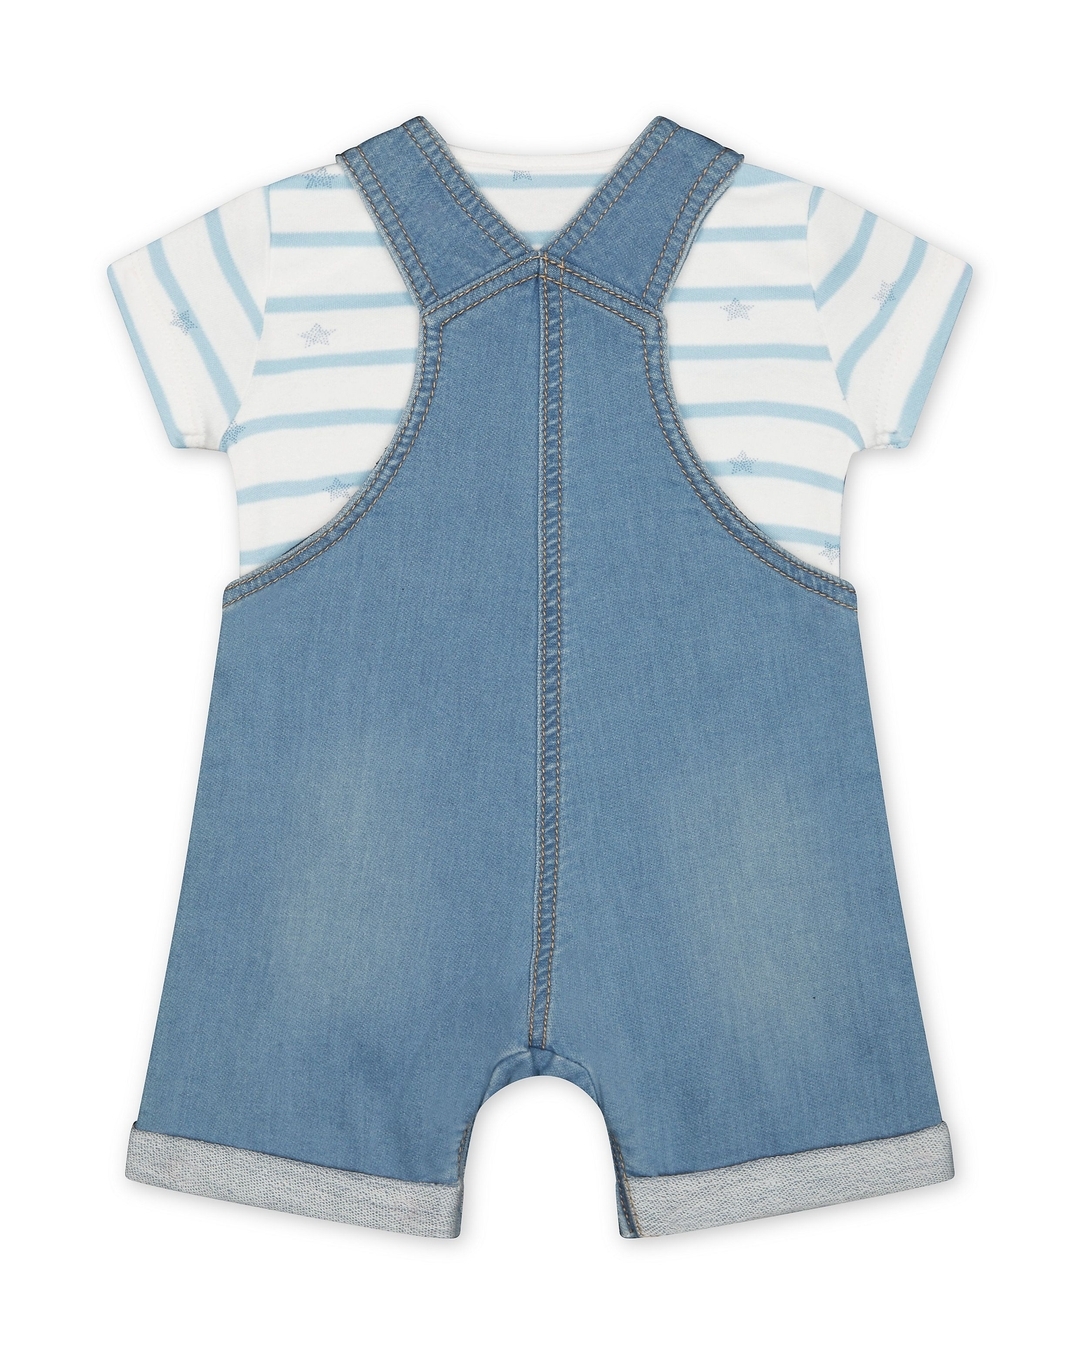 Buy 3T Girls Clothes Kids Jeans Baby Girl Clothes Overalls Short Striped  T-Shirt Little Girl Clothes Denim Rompers Baby Girl Jumpsuits Outfit Set  Light Blue 2PC 3T-4T Girls Clothes at Amazon.in